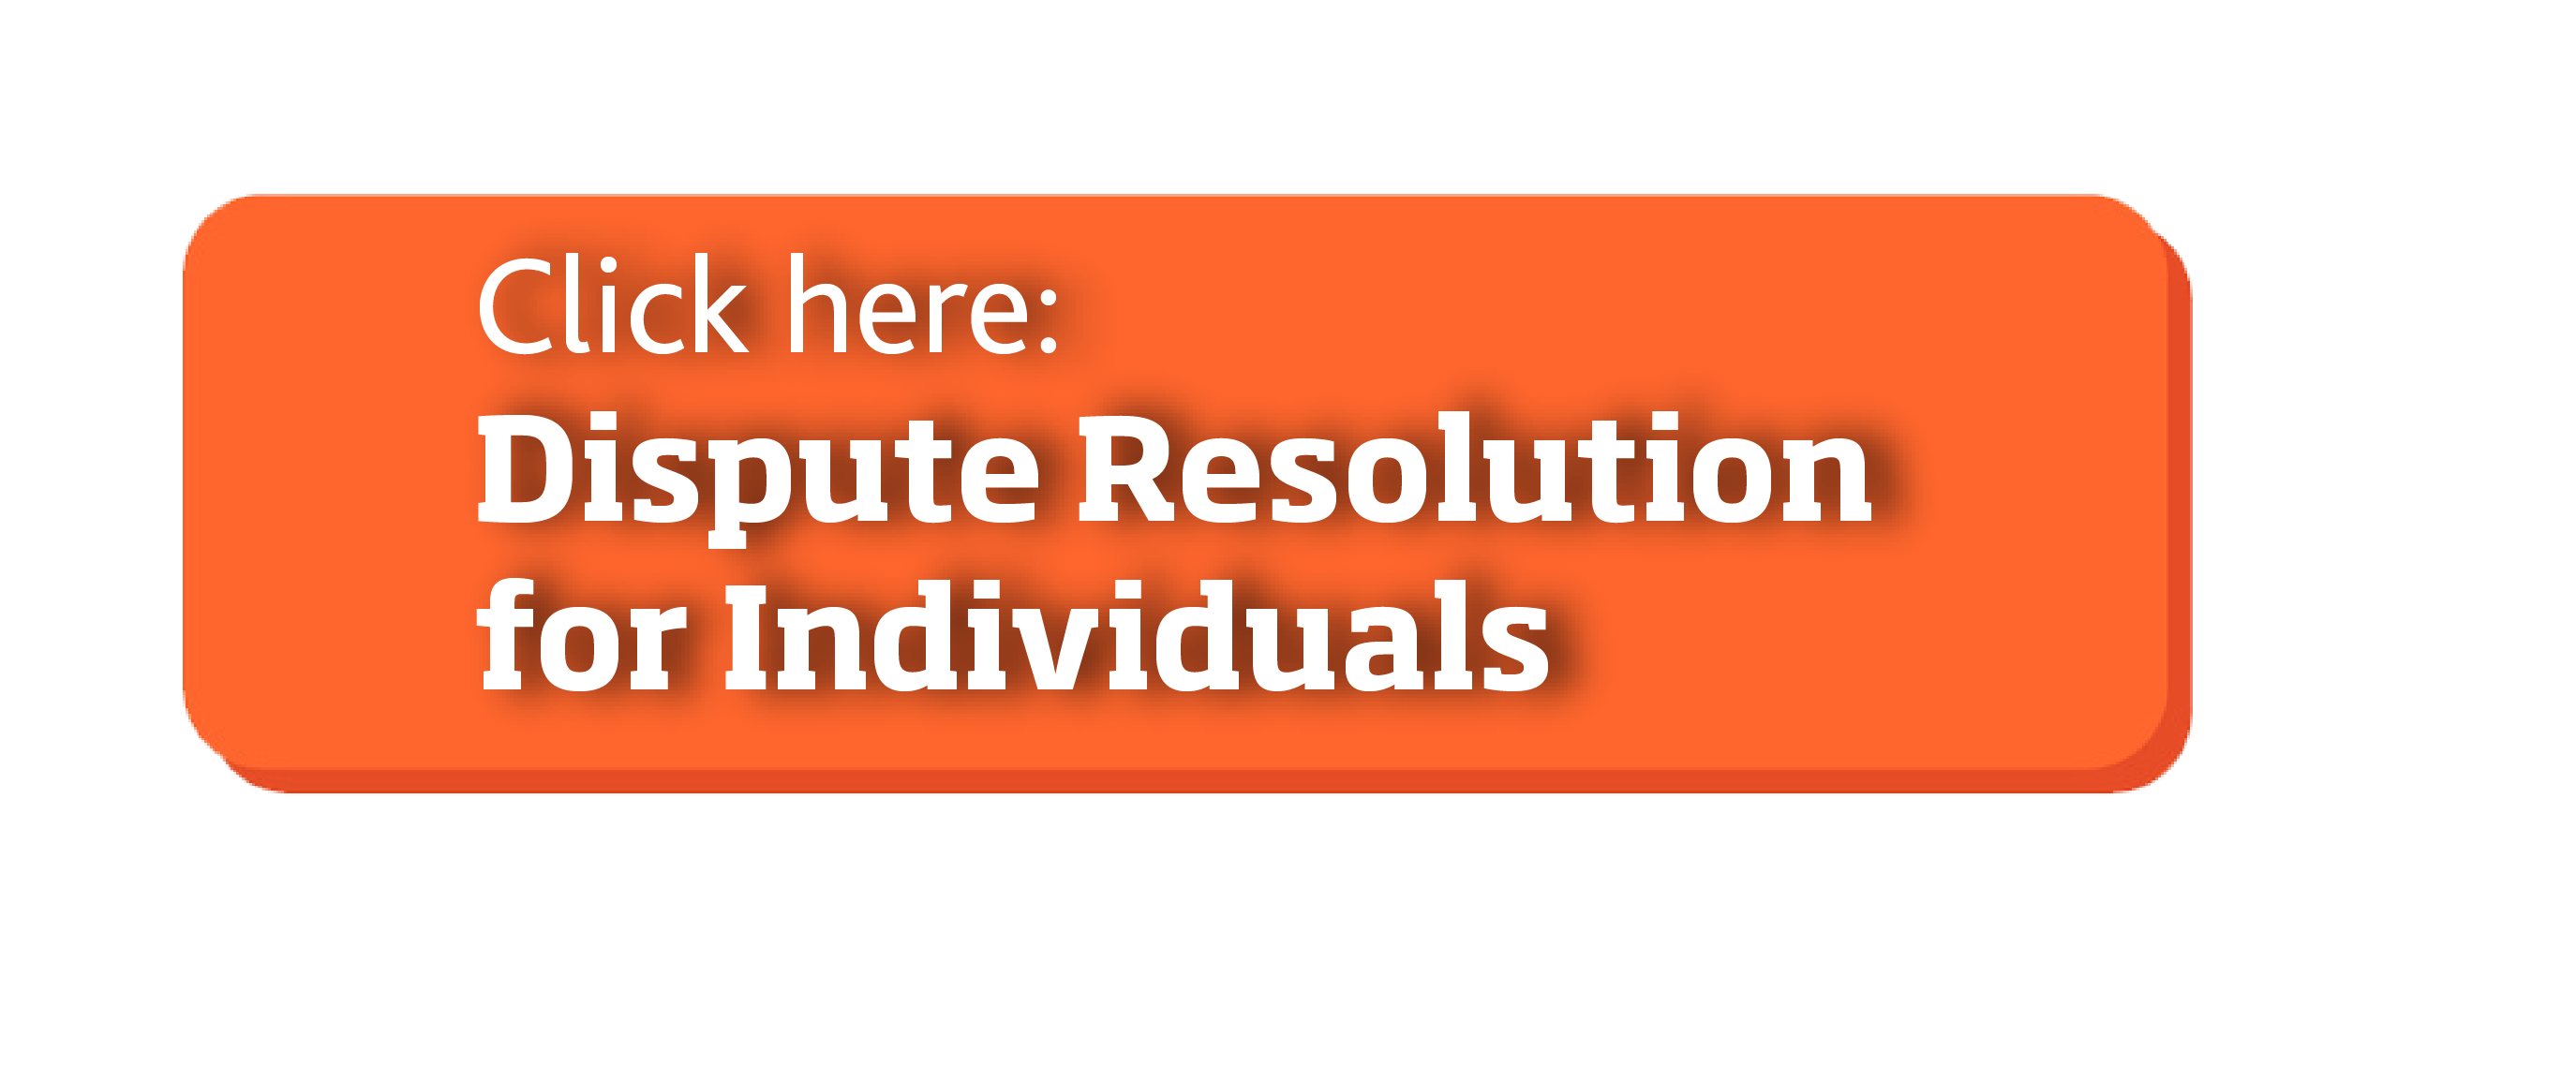 Dispute Resolution for Individuals button